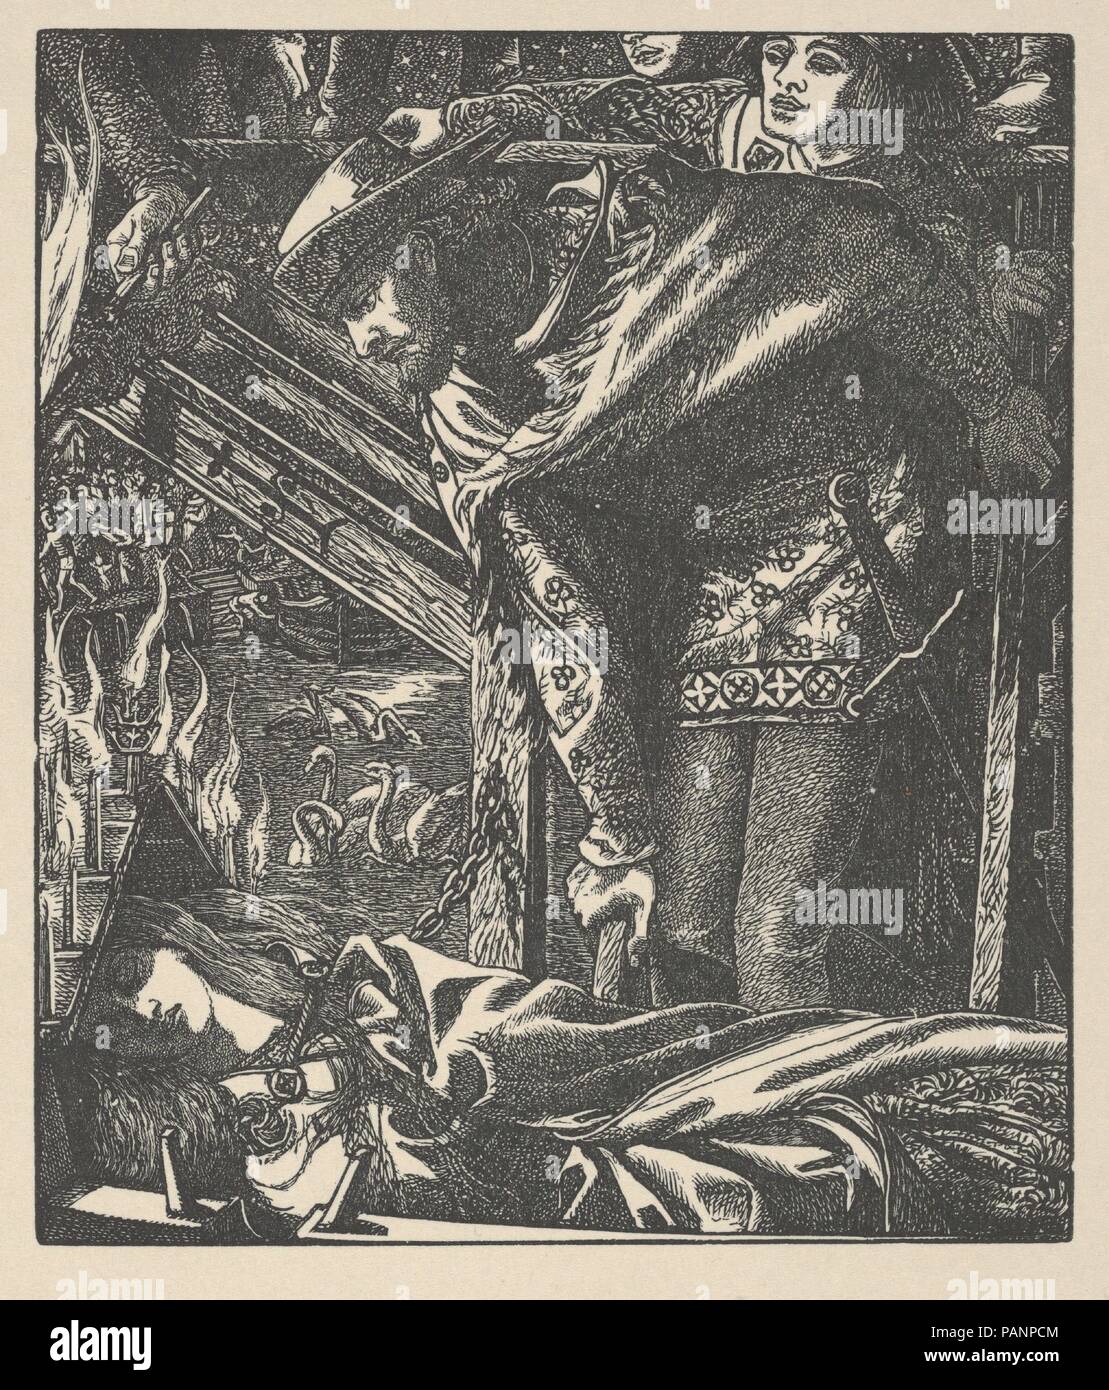 The Lady of Shalott (from Tennyson's Poems, New York, 1903). Artist: After Dante Gabriel Rossetti (British, London 1828-1882 Birchington-on-Sea). Dimensions: Image: 3 11/16 × 3 1/8 in. (9.3 × 8 cm)  Sheet: 8 1/16 × 6 3/16 in. (20.4 × 15.7 cm). Engraver: Dalziel Brothers (British, active 1839-1893). Date: 1857-1903.  Rossetti's 1857 illustrations of Tennyson--reissued here in 1903--incorporate startling effects derived from medieval and early Renaissance art. Space collapses, forms are cut off, and narrative details are inserted without concern for conventional perspective. The Lady of Shalott  Stock Photo